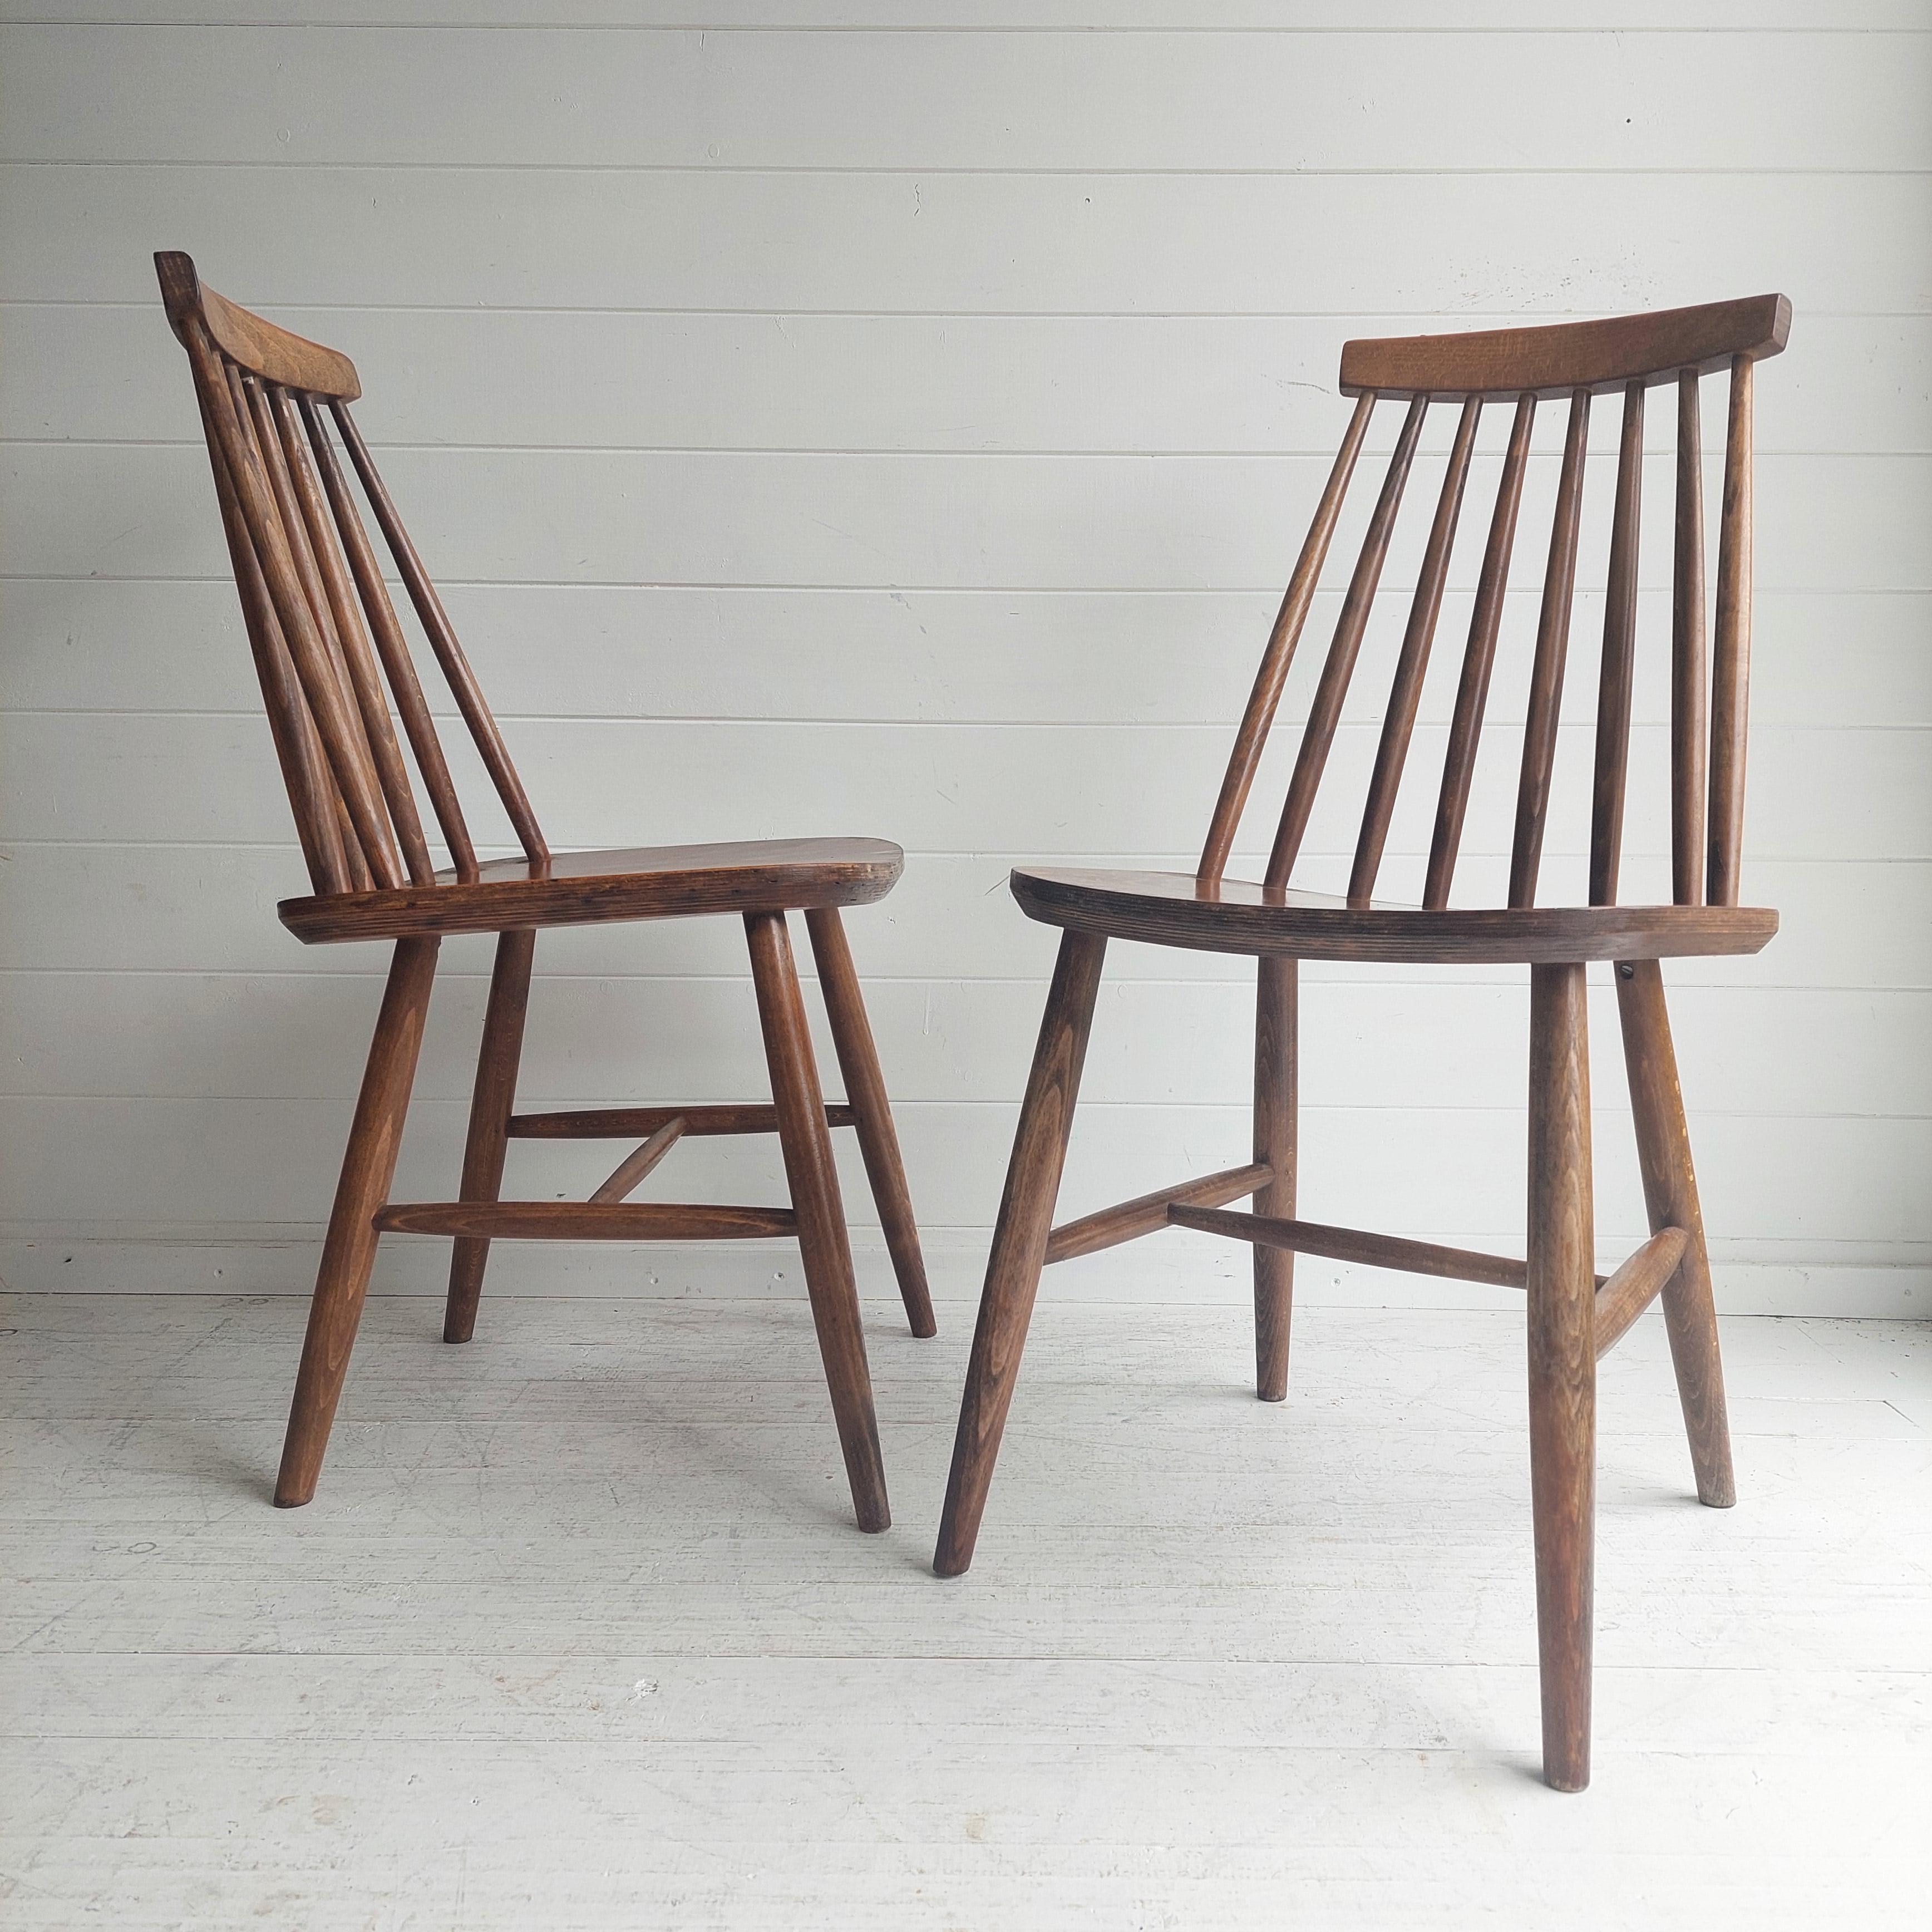 Tellus Model Chairs
1960s manufactured and marketed by IKEA.

Birch Wood dark walnut finish
According to IKEA itself 